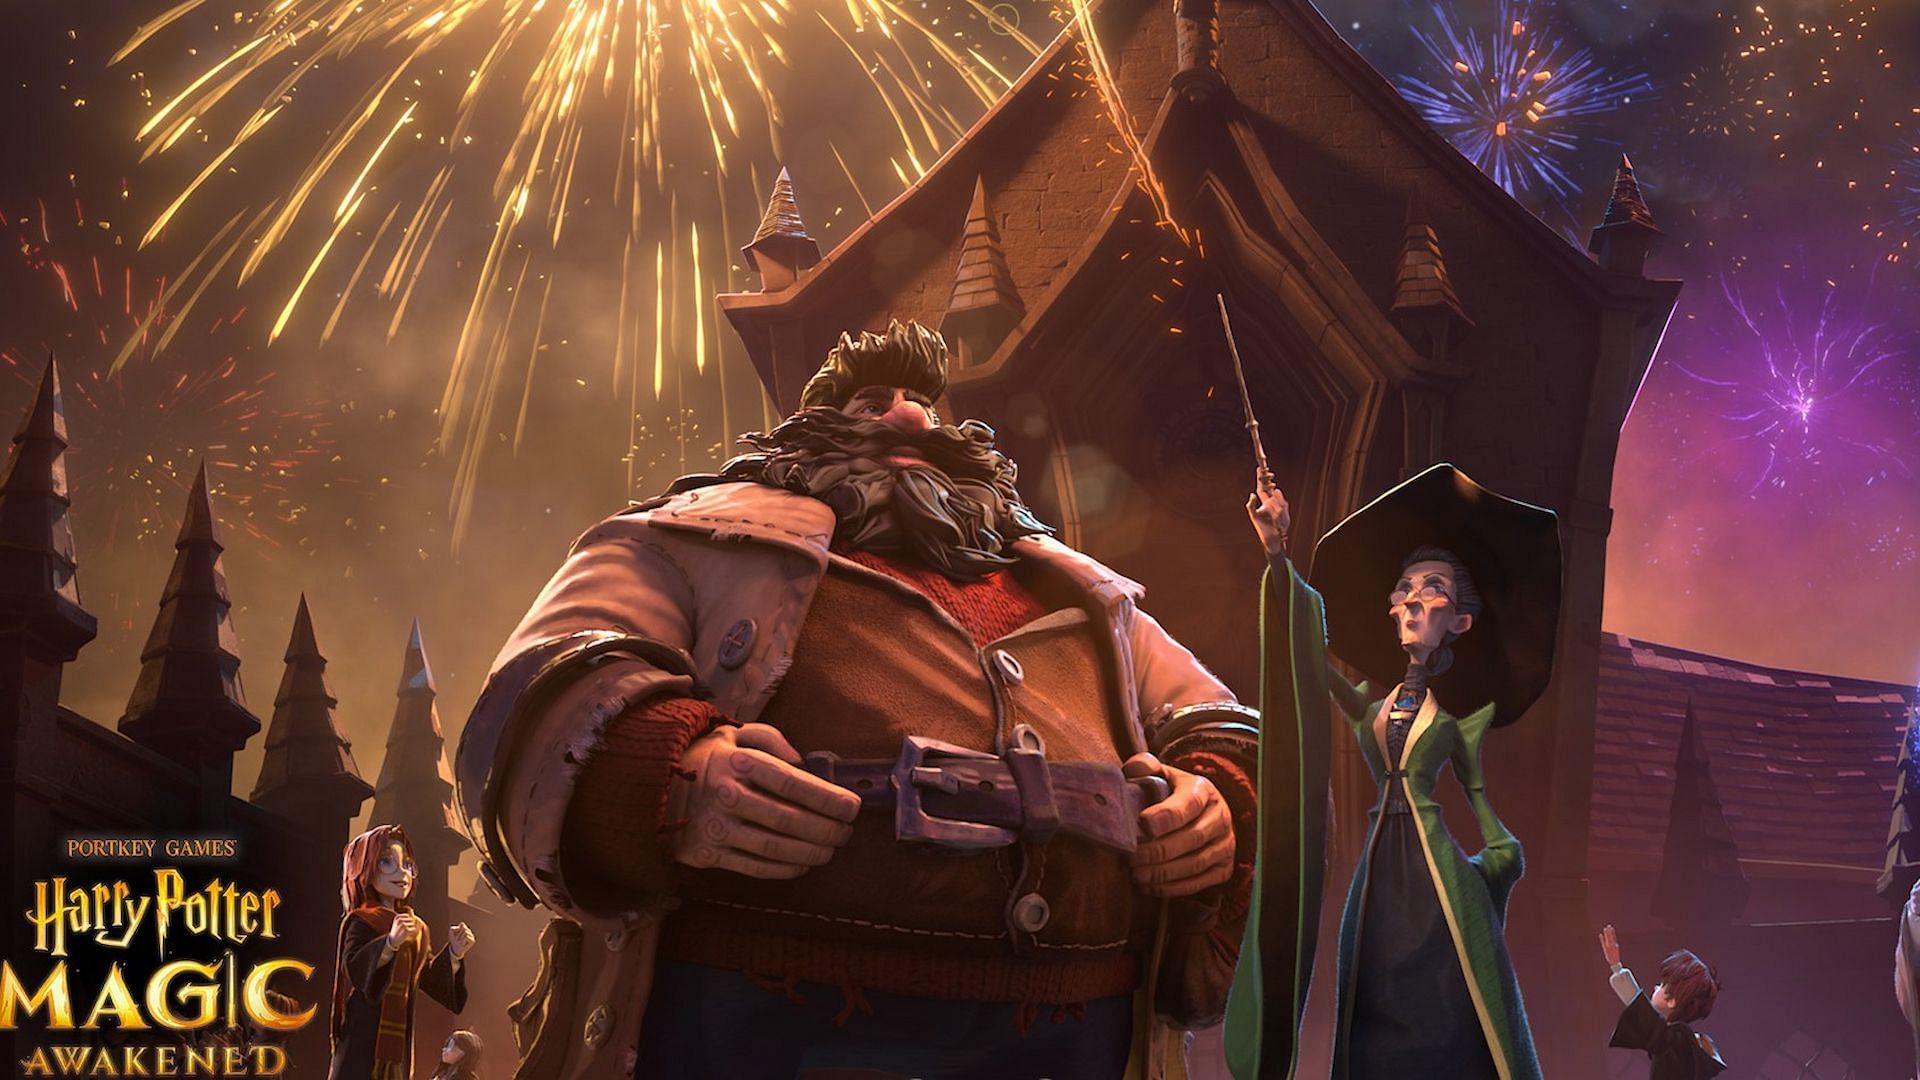 Hagrid and Professor McGonagall in the cover image of Harry Potter Magic Awakened